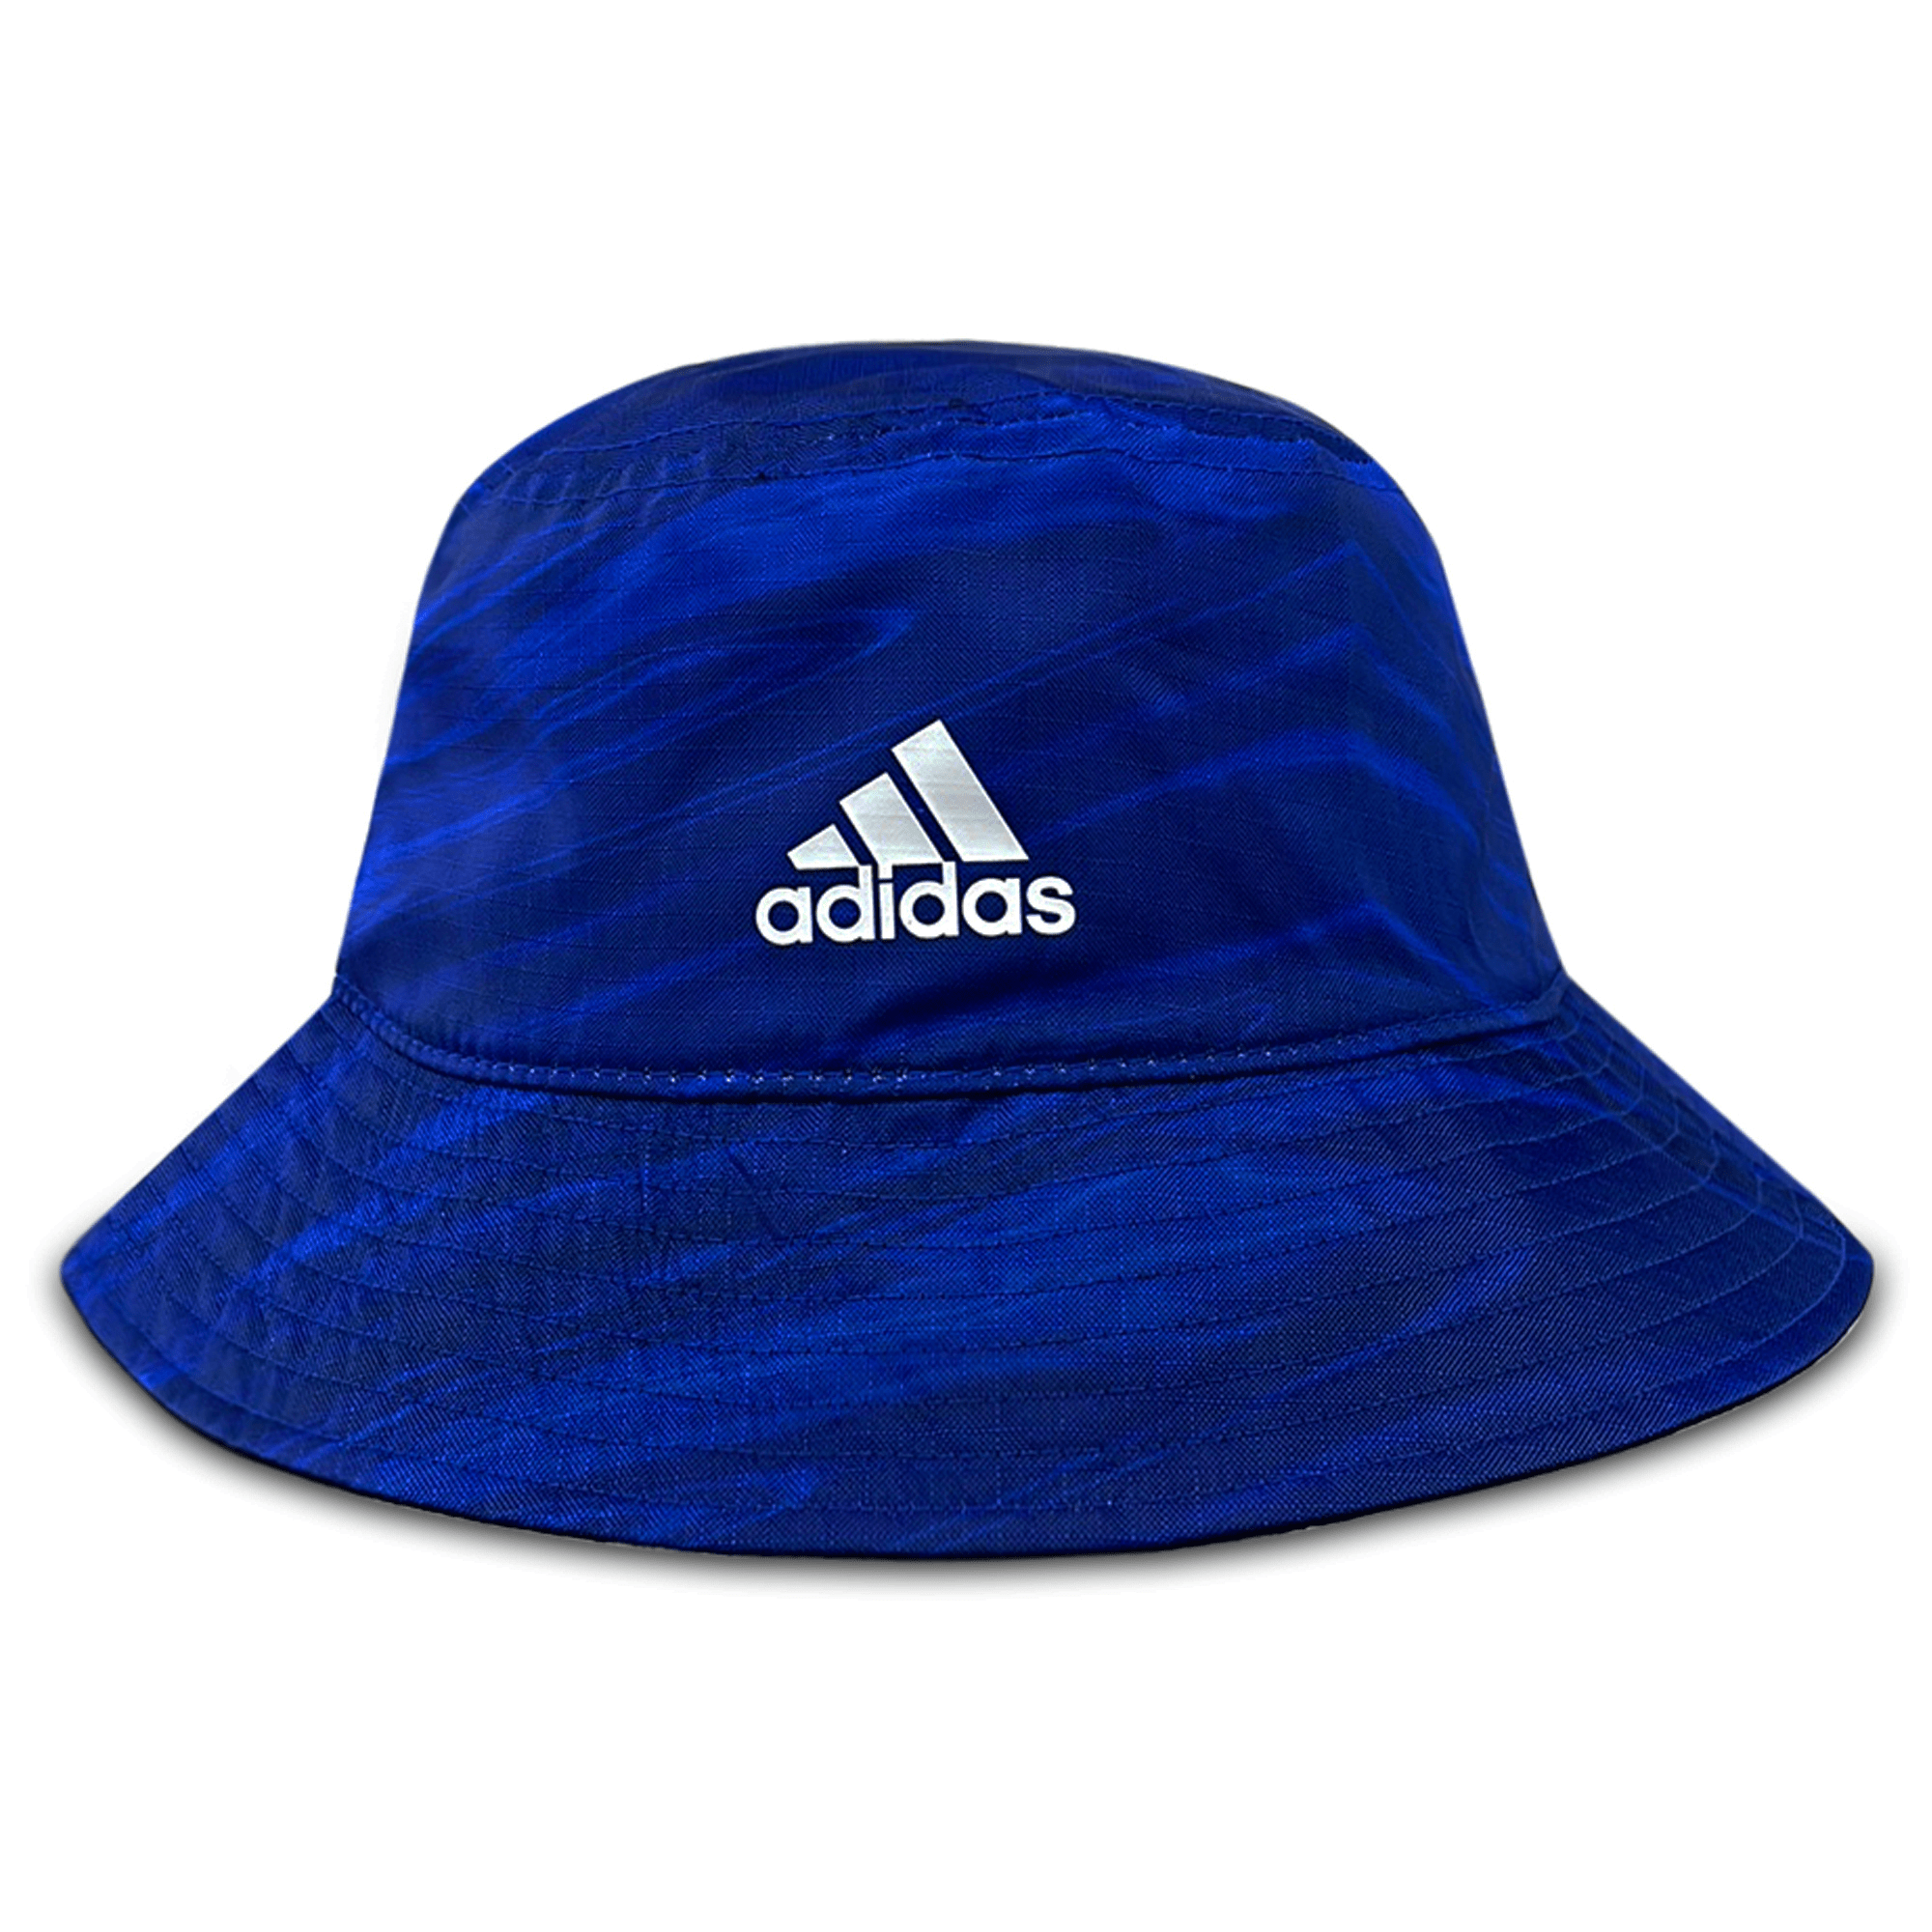 Blues Super Rugby Bucket Hat by adidas - World Rugby Shop